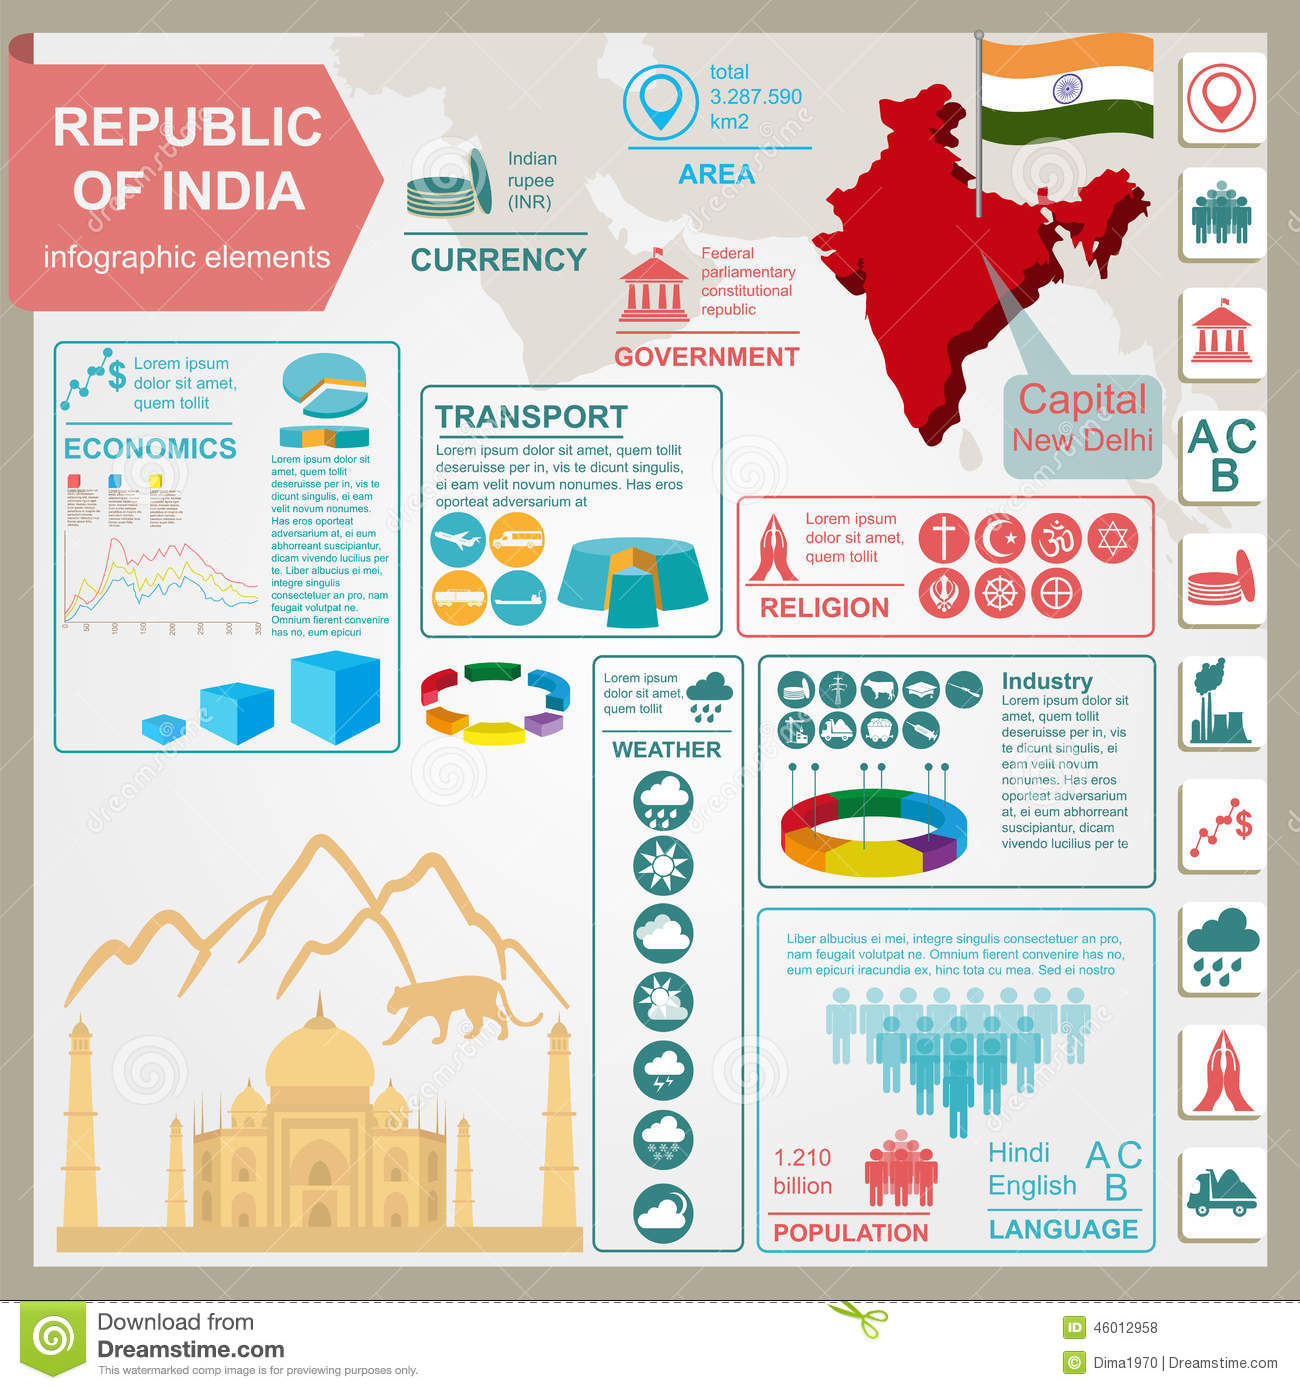 Infographic: How India forms a government | India | Al Jazeera